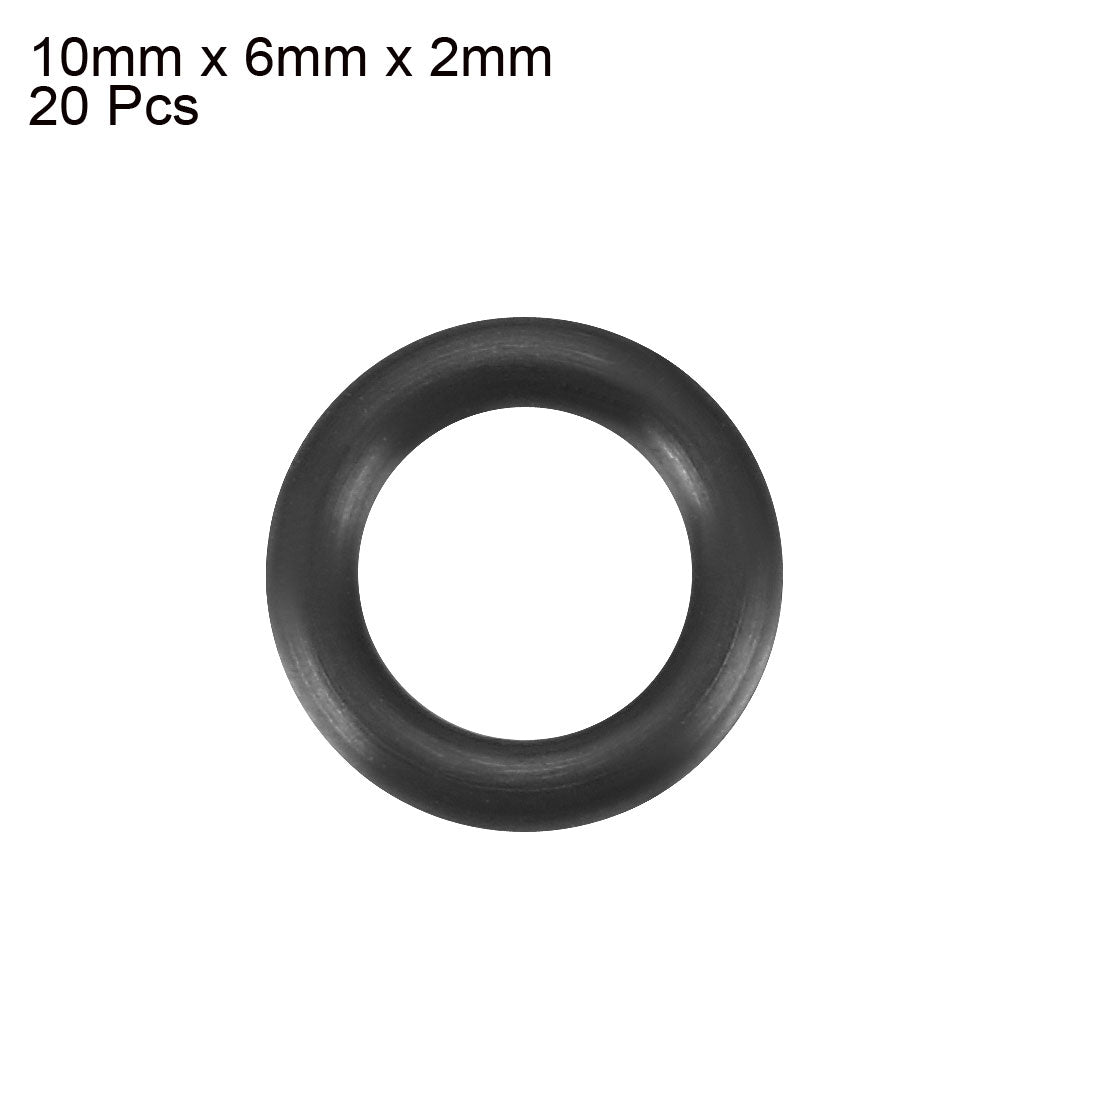 uxcell Uxcell 10mm x 6mm x 2mm Rubber Oil Seal O Ring Gasket Washer Black 20 Pcs